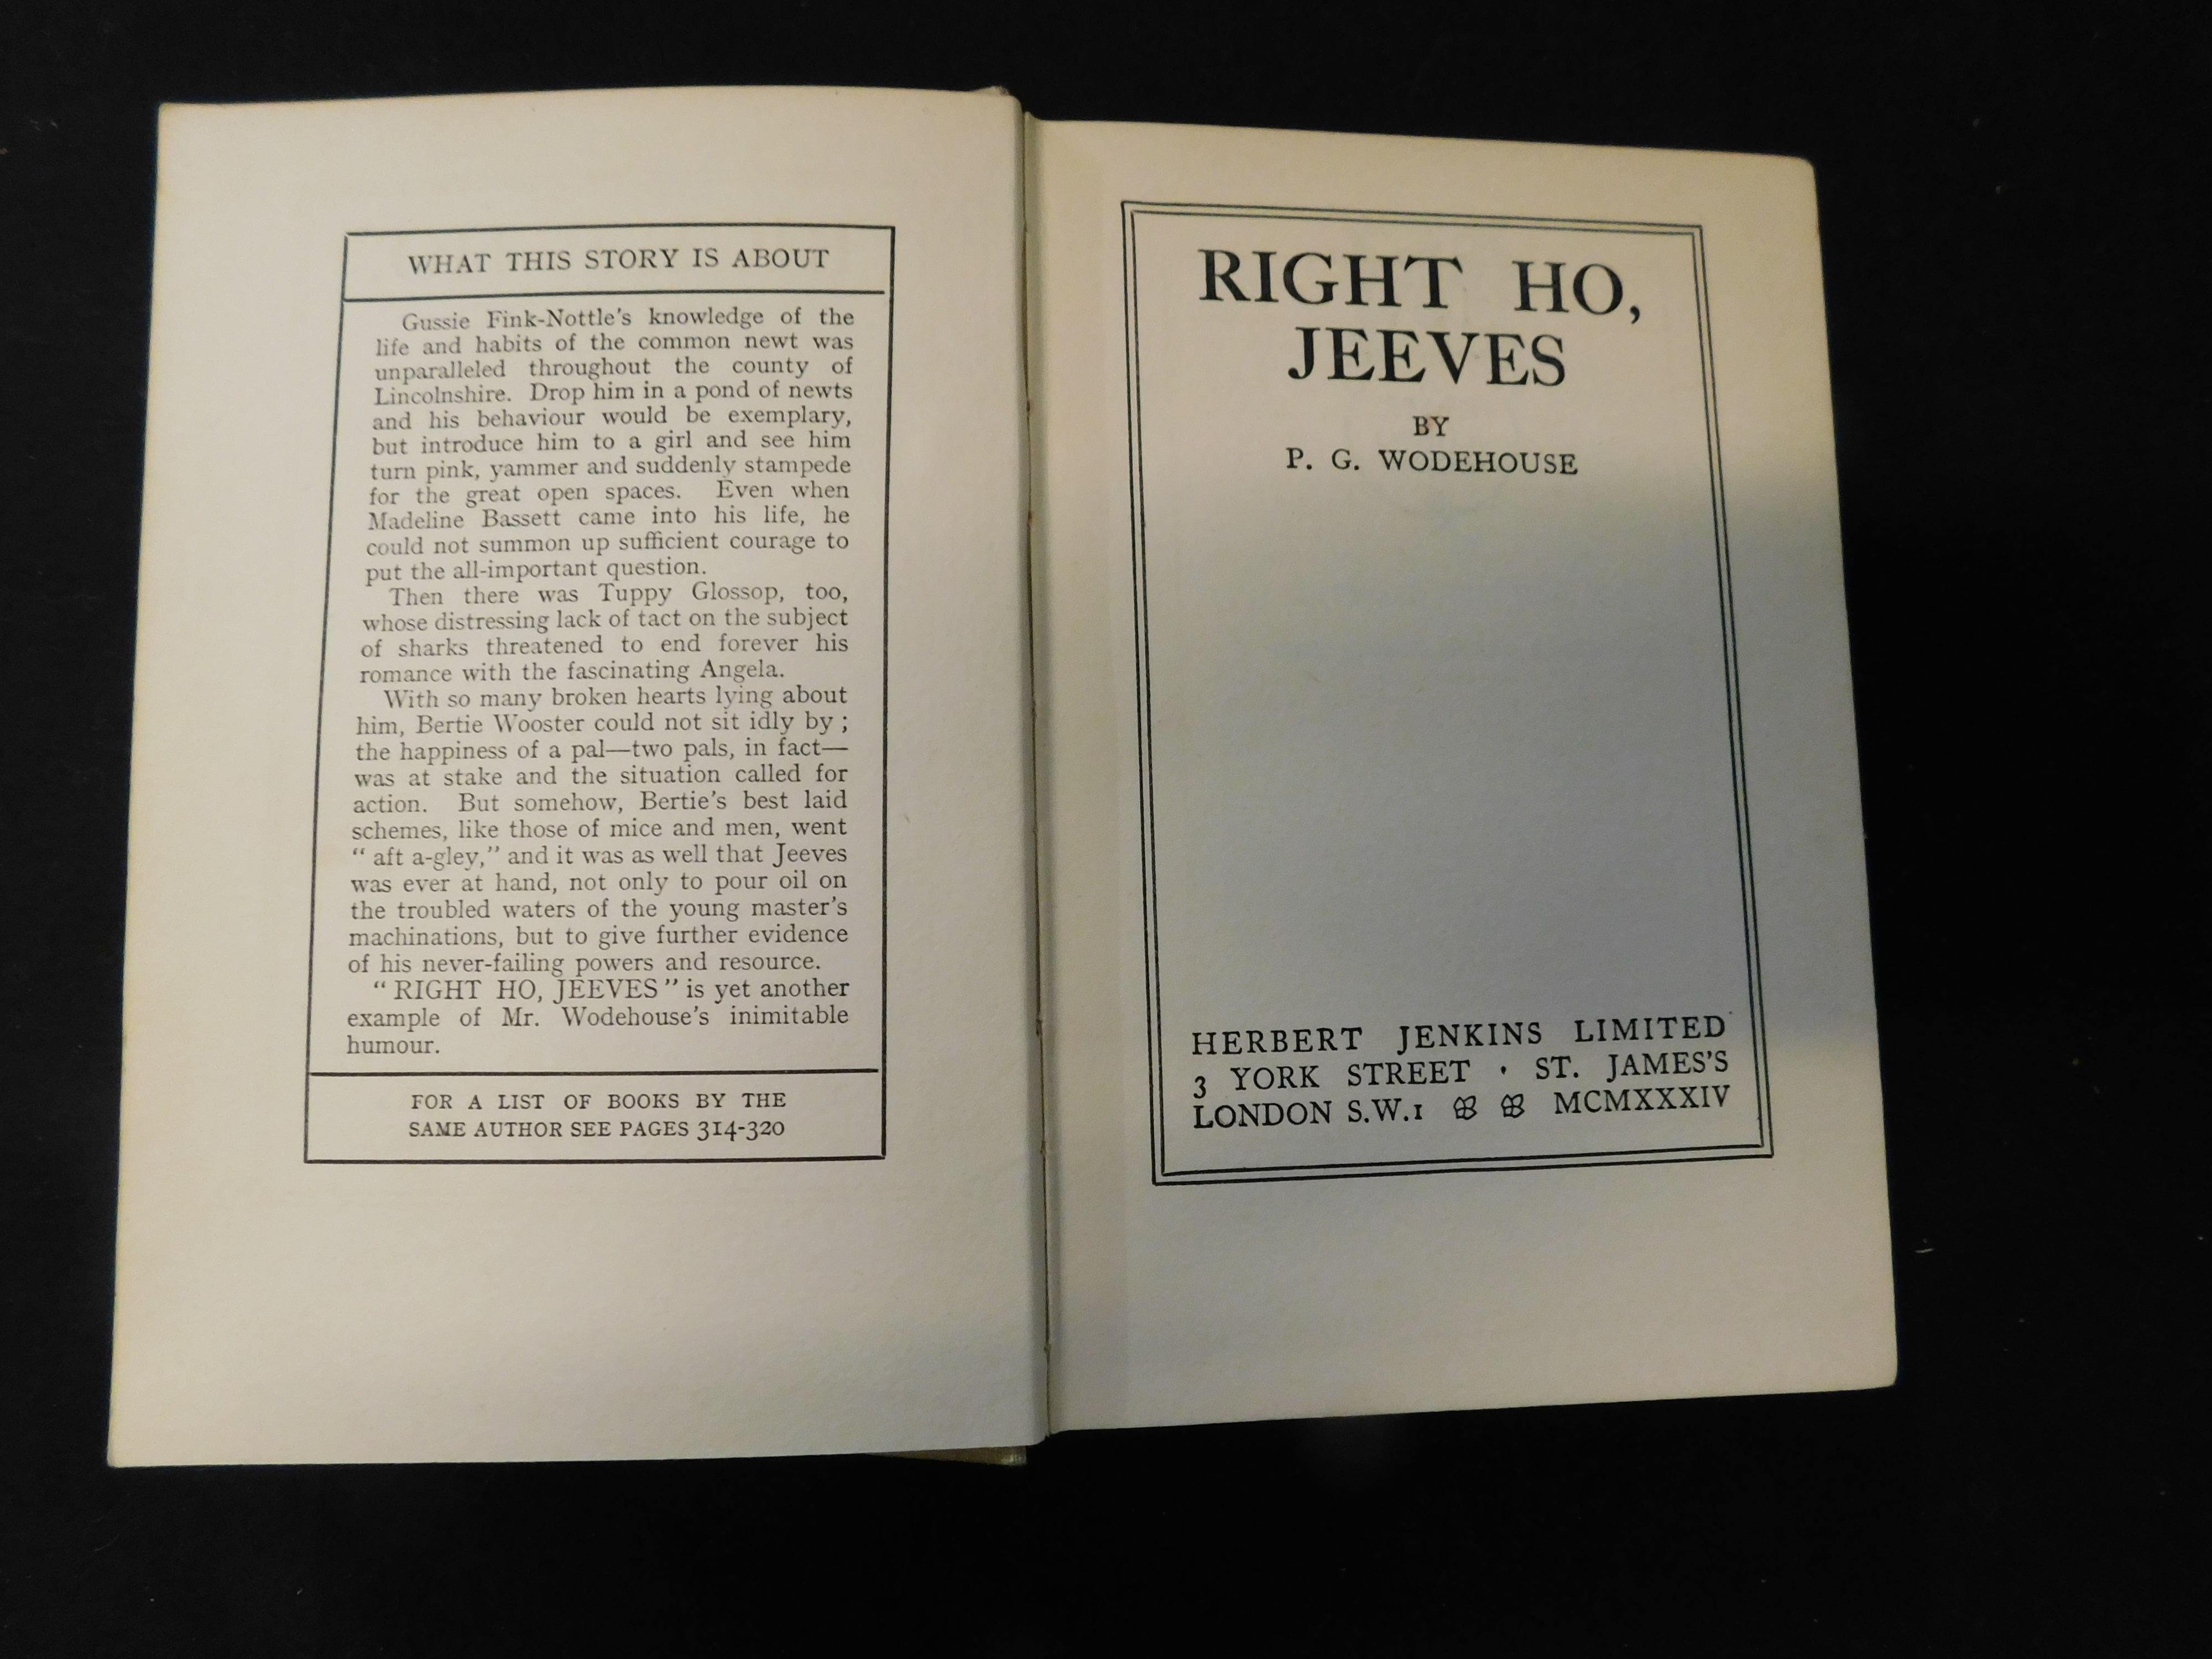 P G WODEHOUSE: RIGHT HO JEEVES, London, Herbert Jenkins, 1934 first edition, 8pp adverts at end, - Image 2 of 2